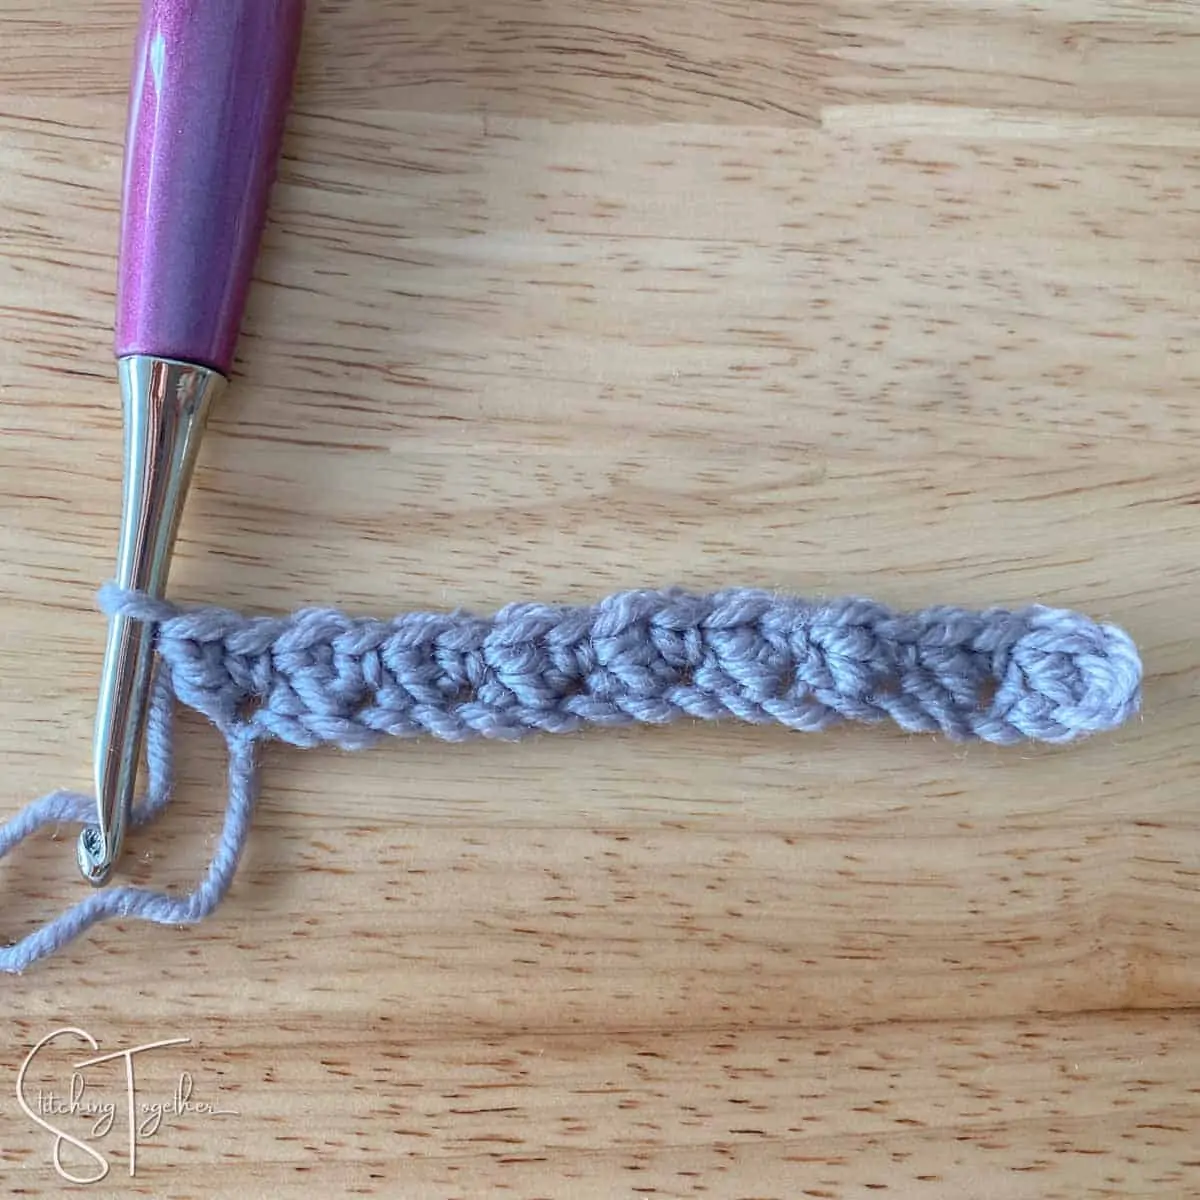 Learn how to Crochet the Suzette Stitch